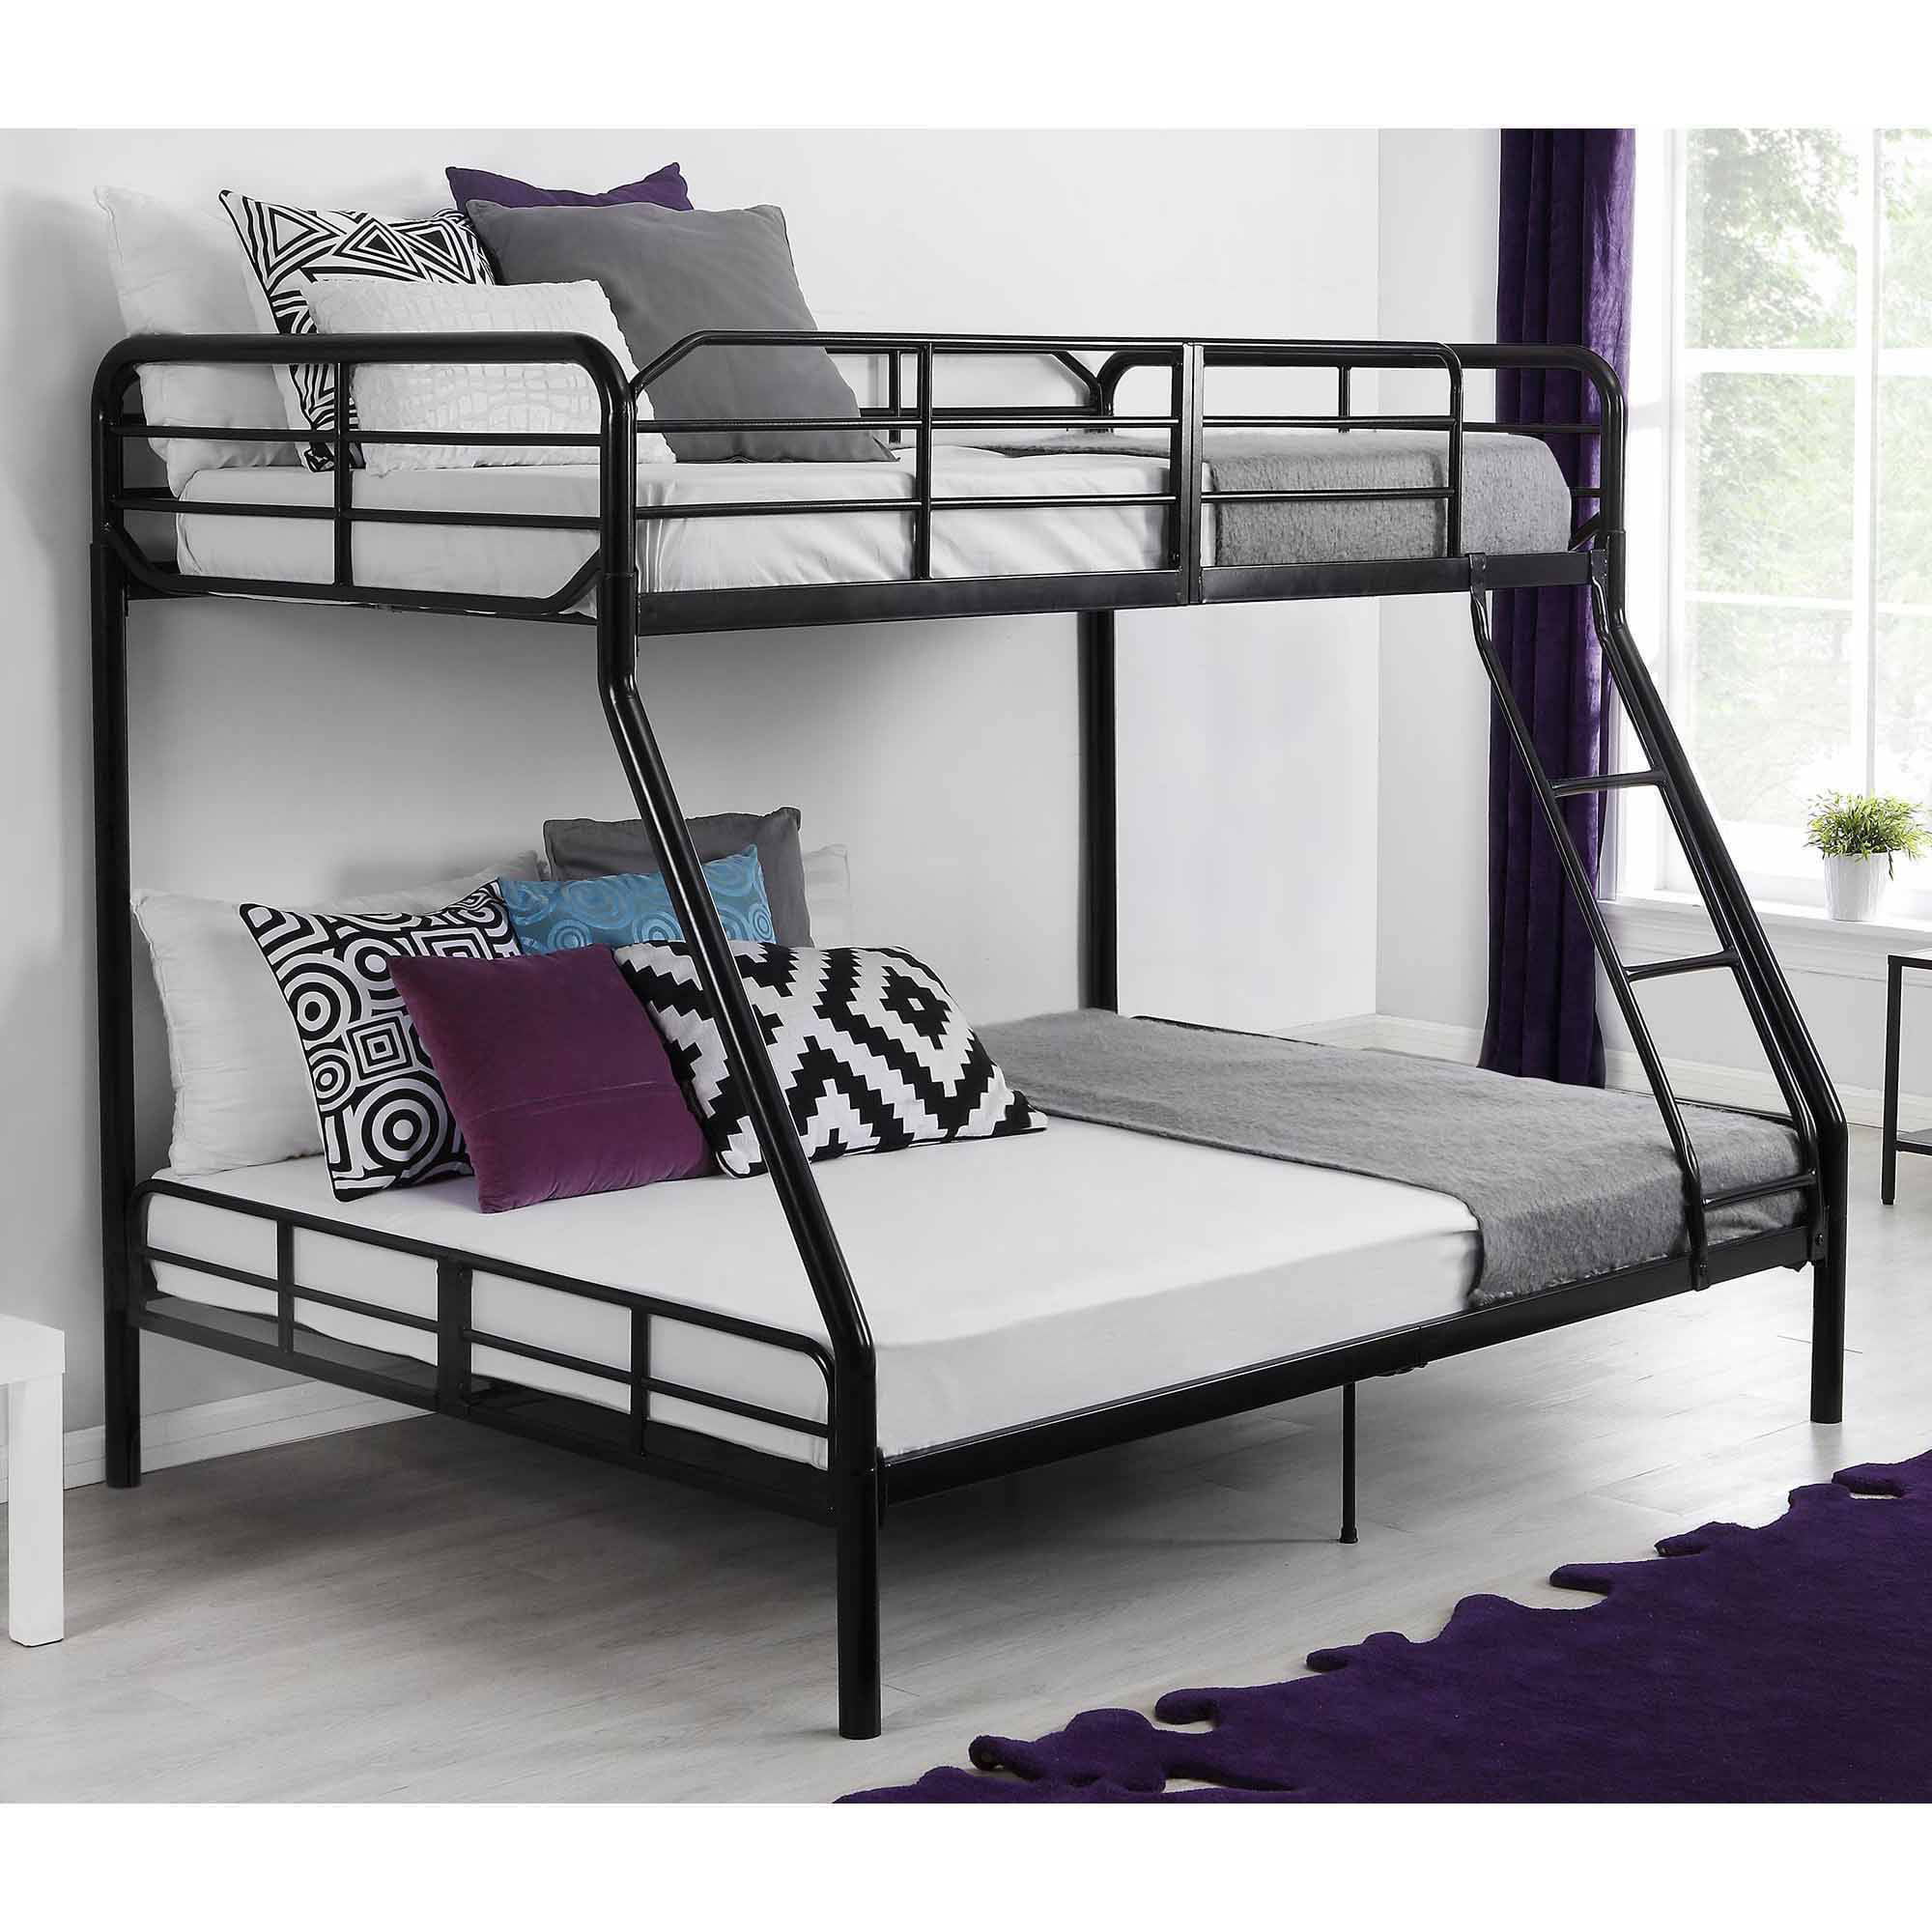 image 0 of Mainstays Twin Over Full Metal Sturdy Bunk Bed, Black